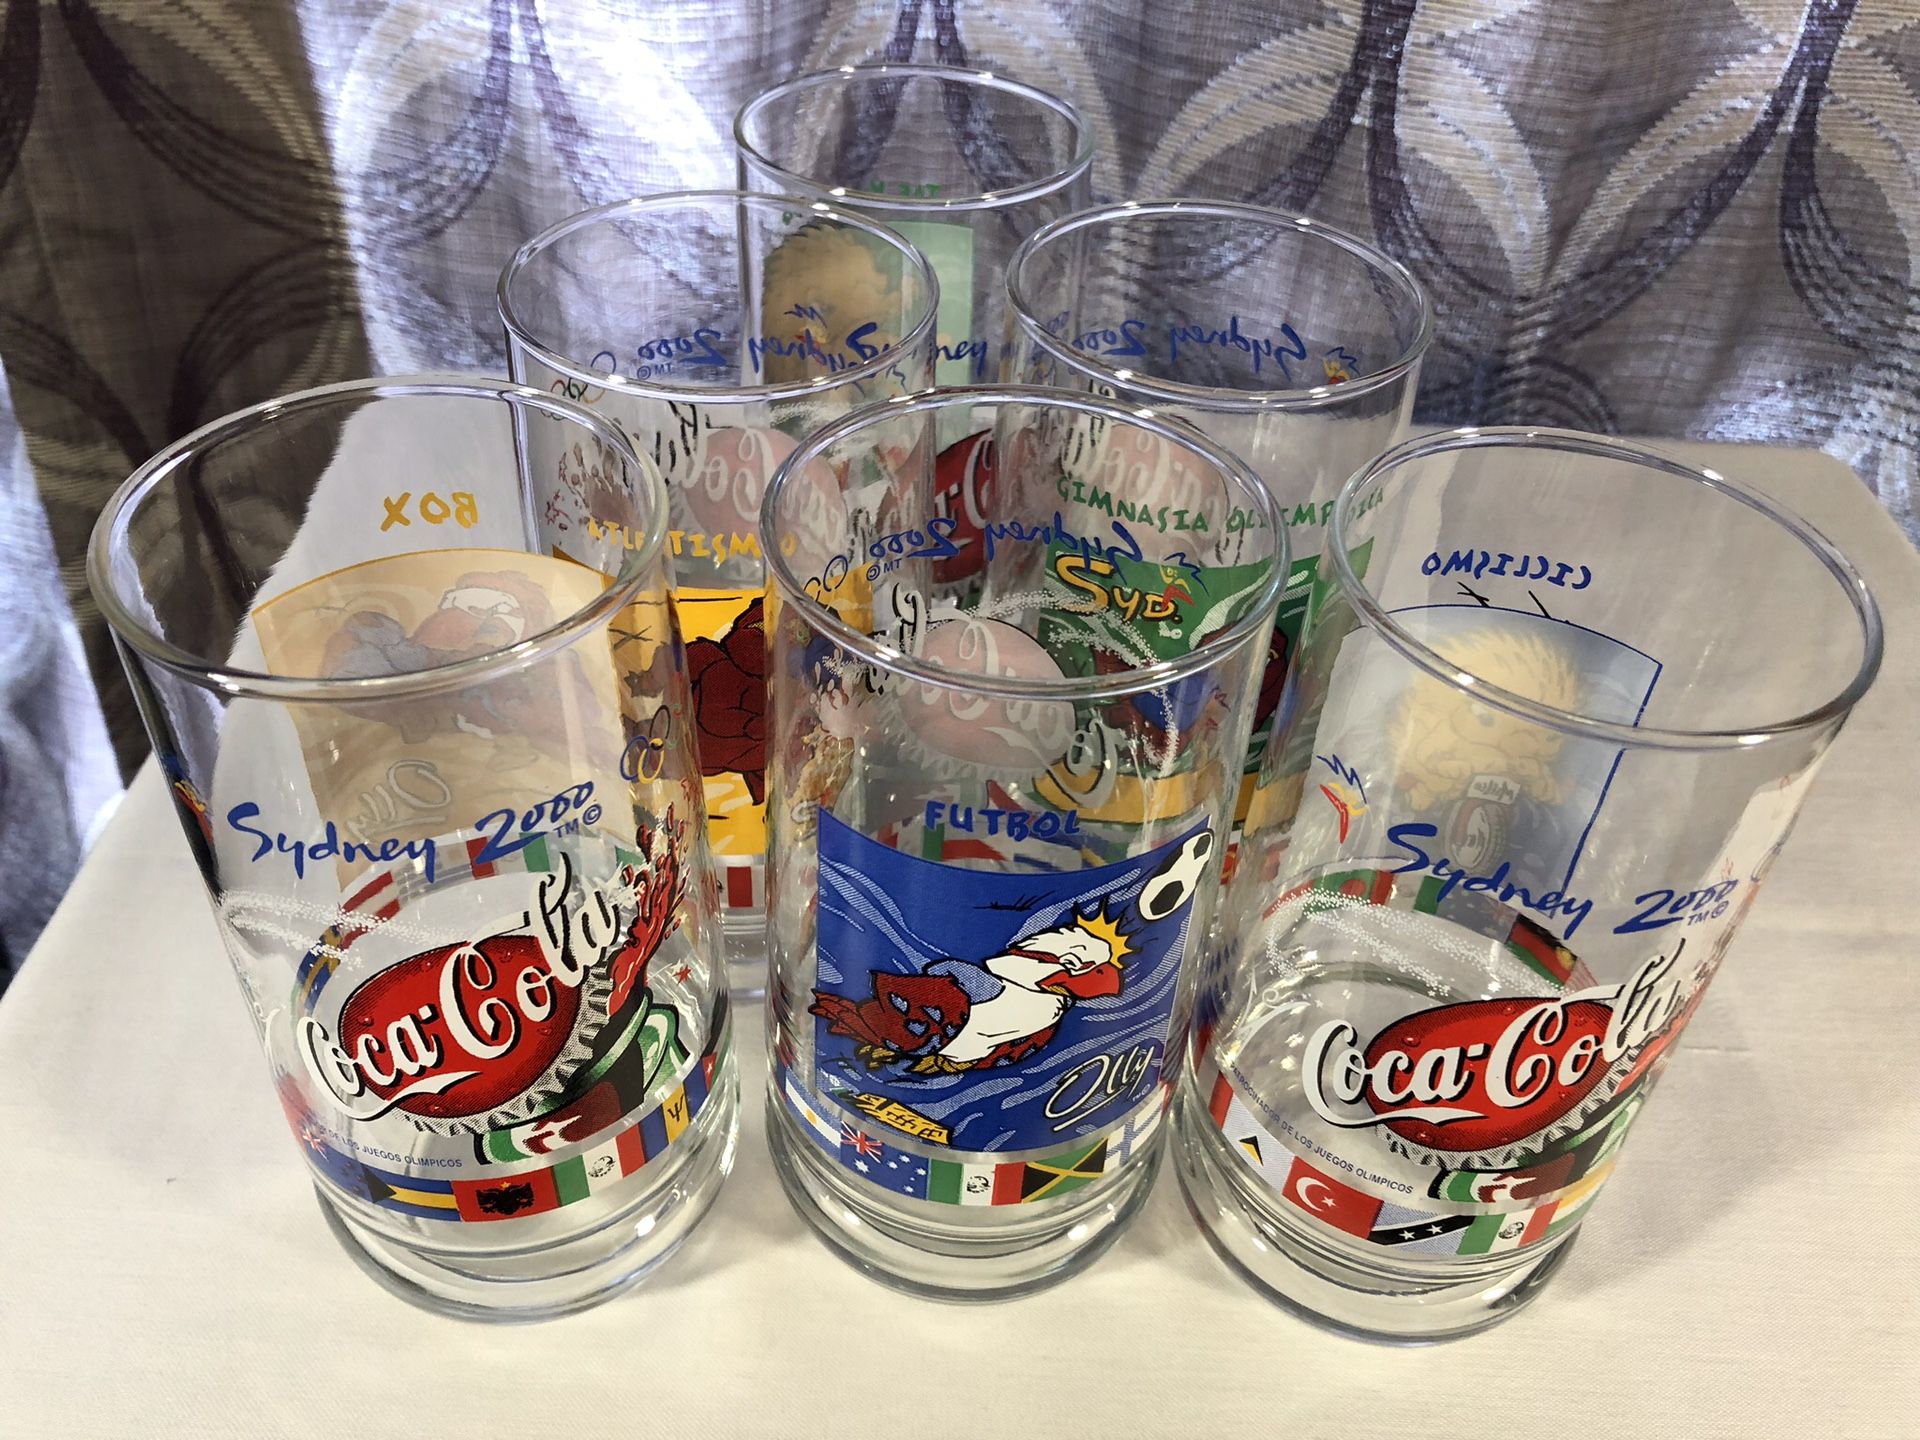 Sydney 2000 Summer Olympics Collectible Glasses Variety 16oz $8 each